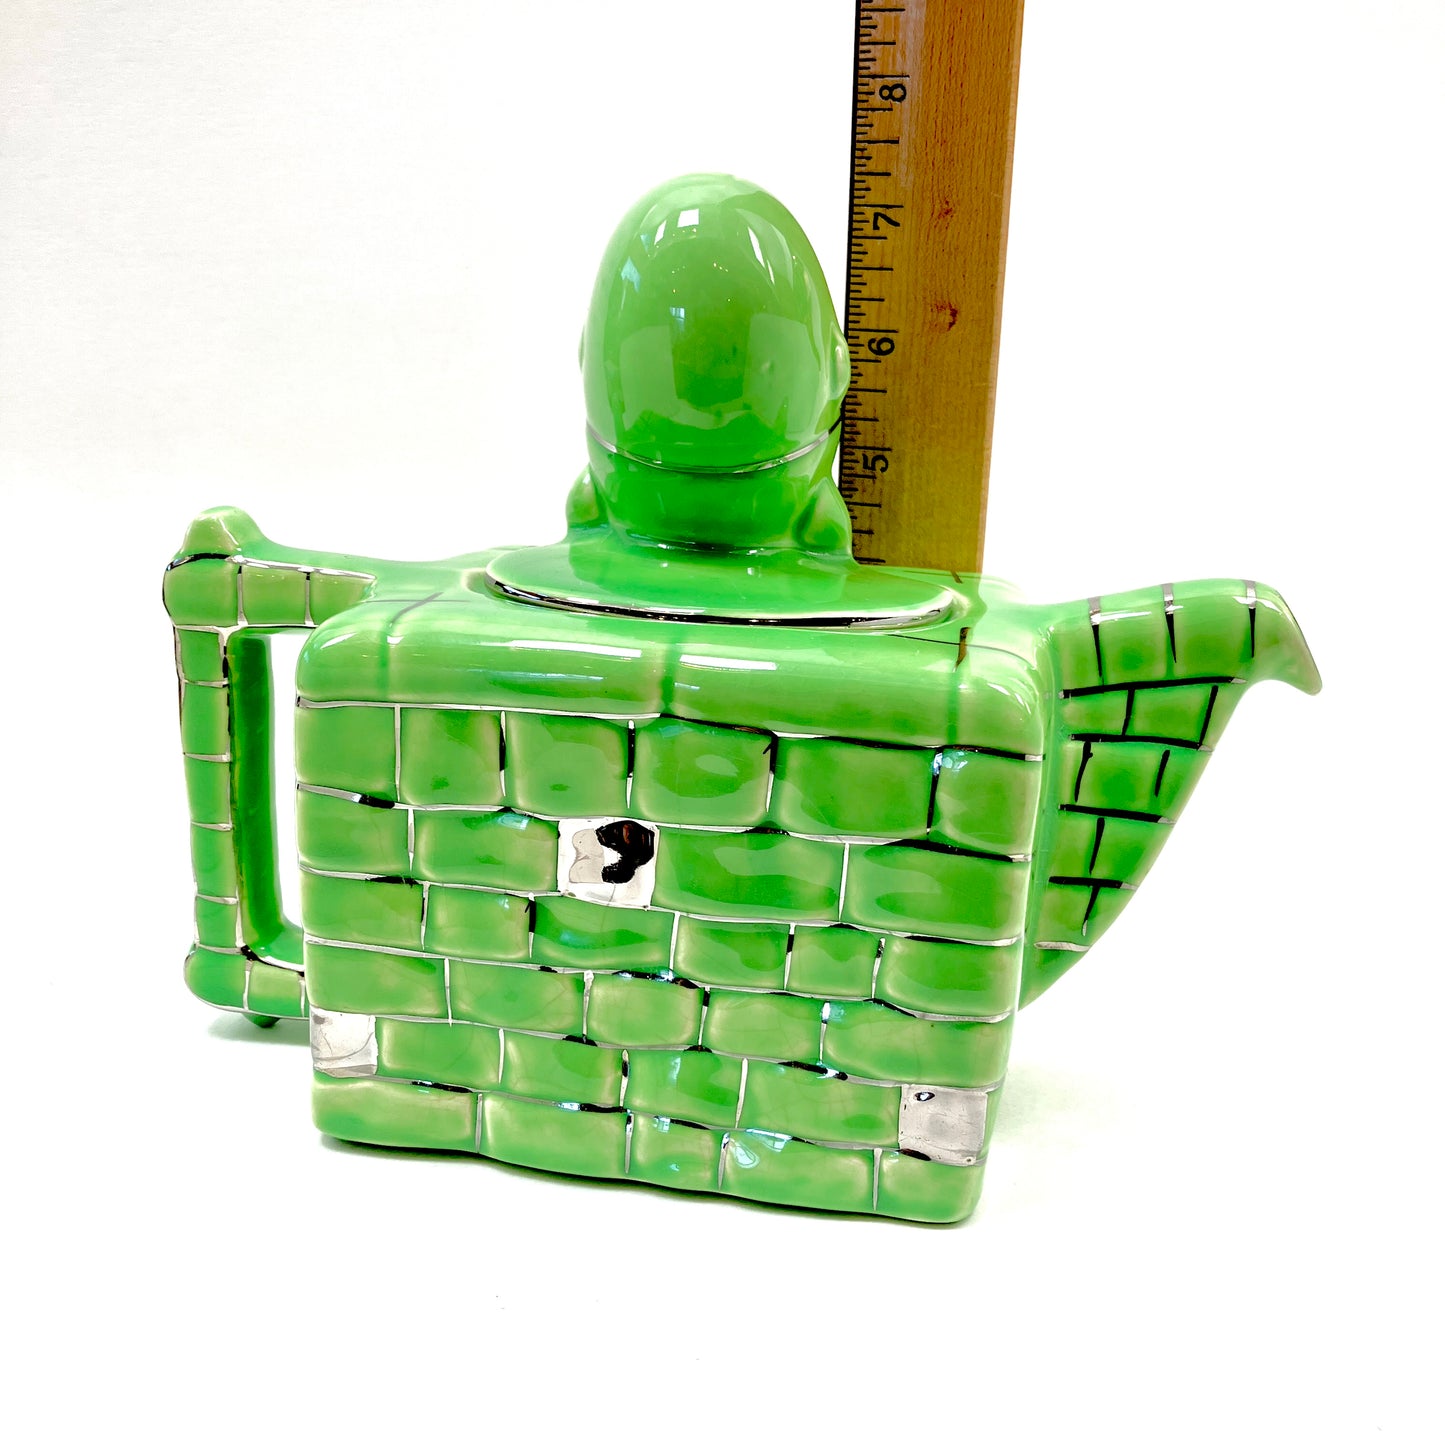 Lingard, Teapot, Figural, Humpty Dumpty, Vintage, Lime Green, Silver Trimmed, England, 830, 10L